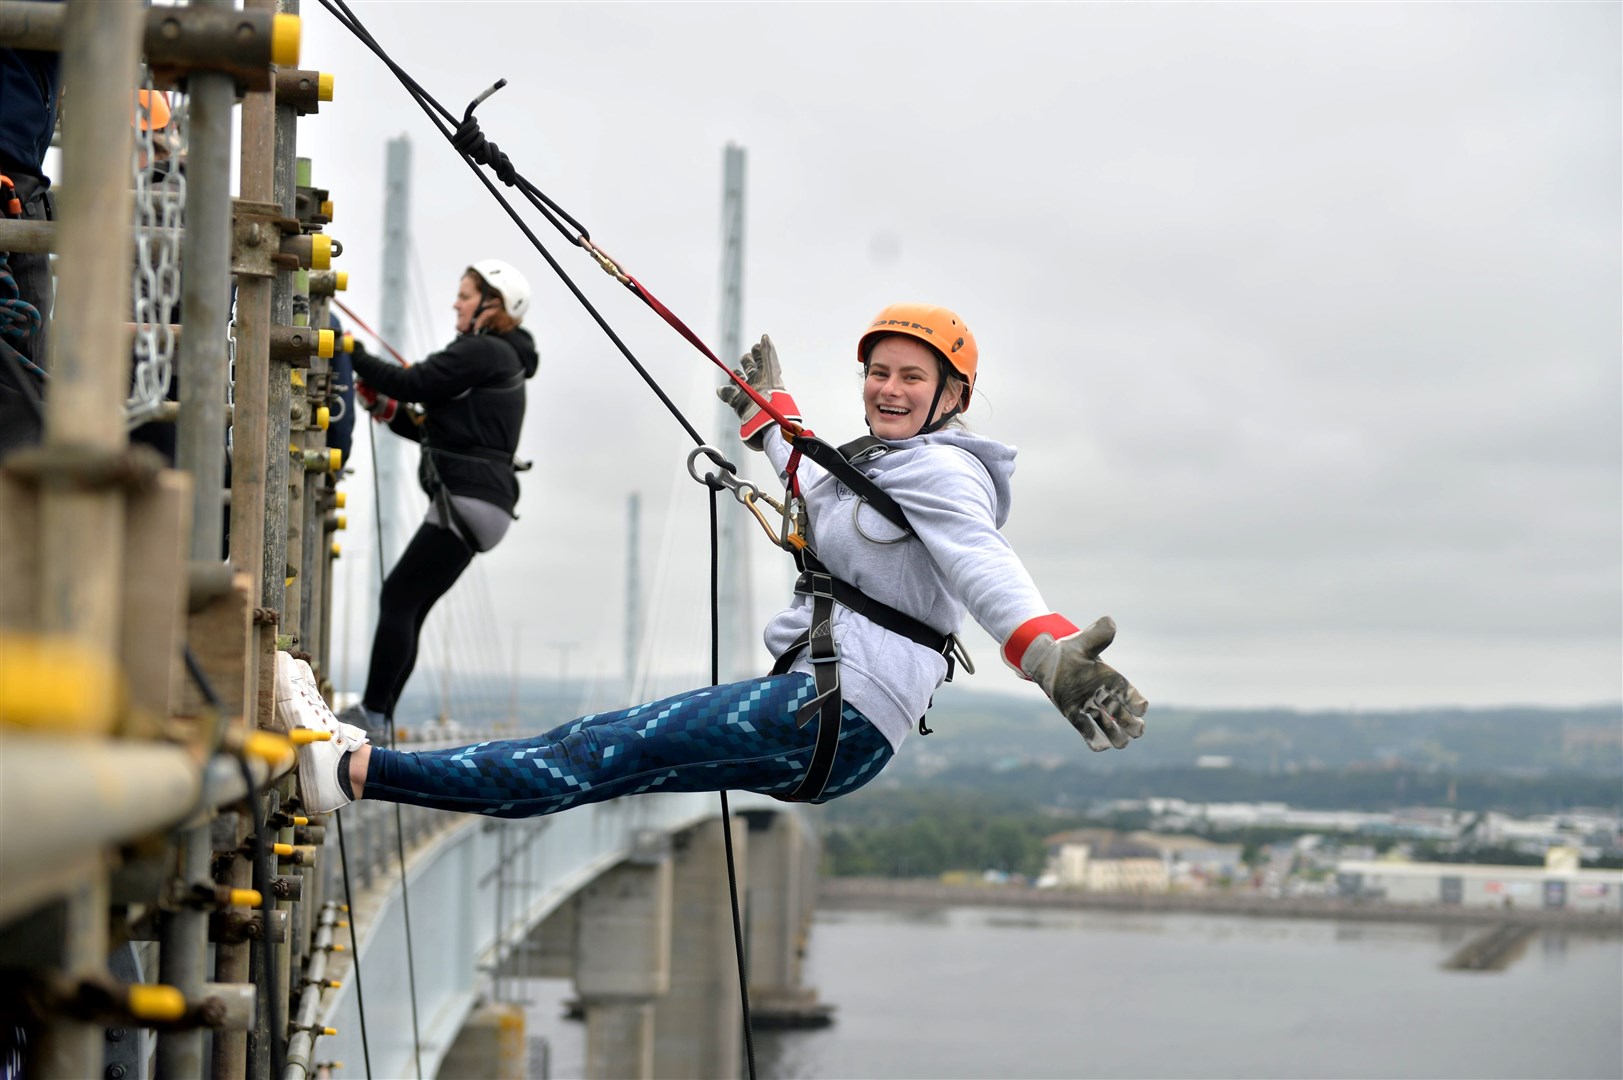 A previous Kessock Bridge abseil for Highland Hospice was a huge success. The adrenaline-pumping zipline planned for the beginning of September has already proved very popular.